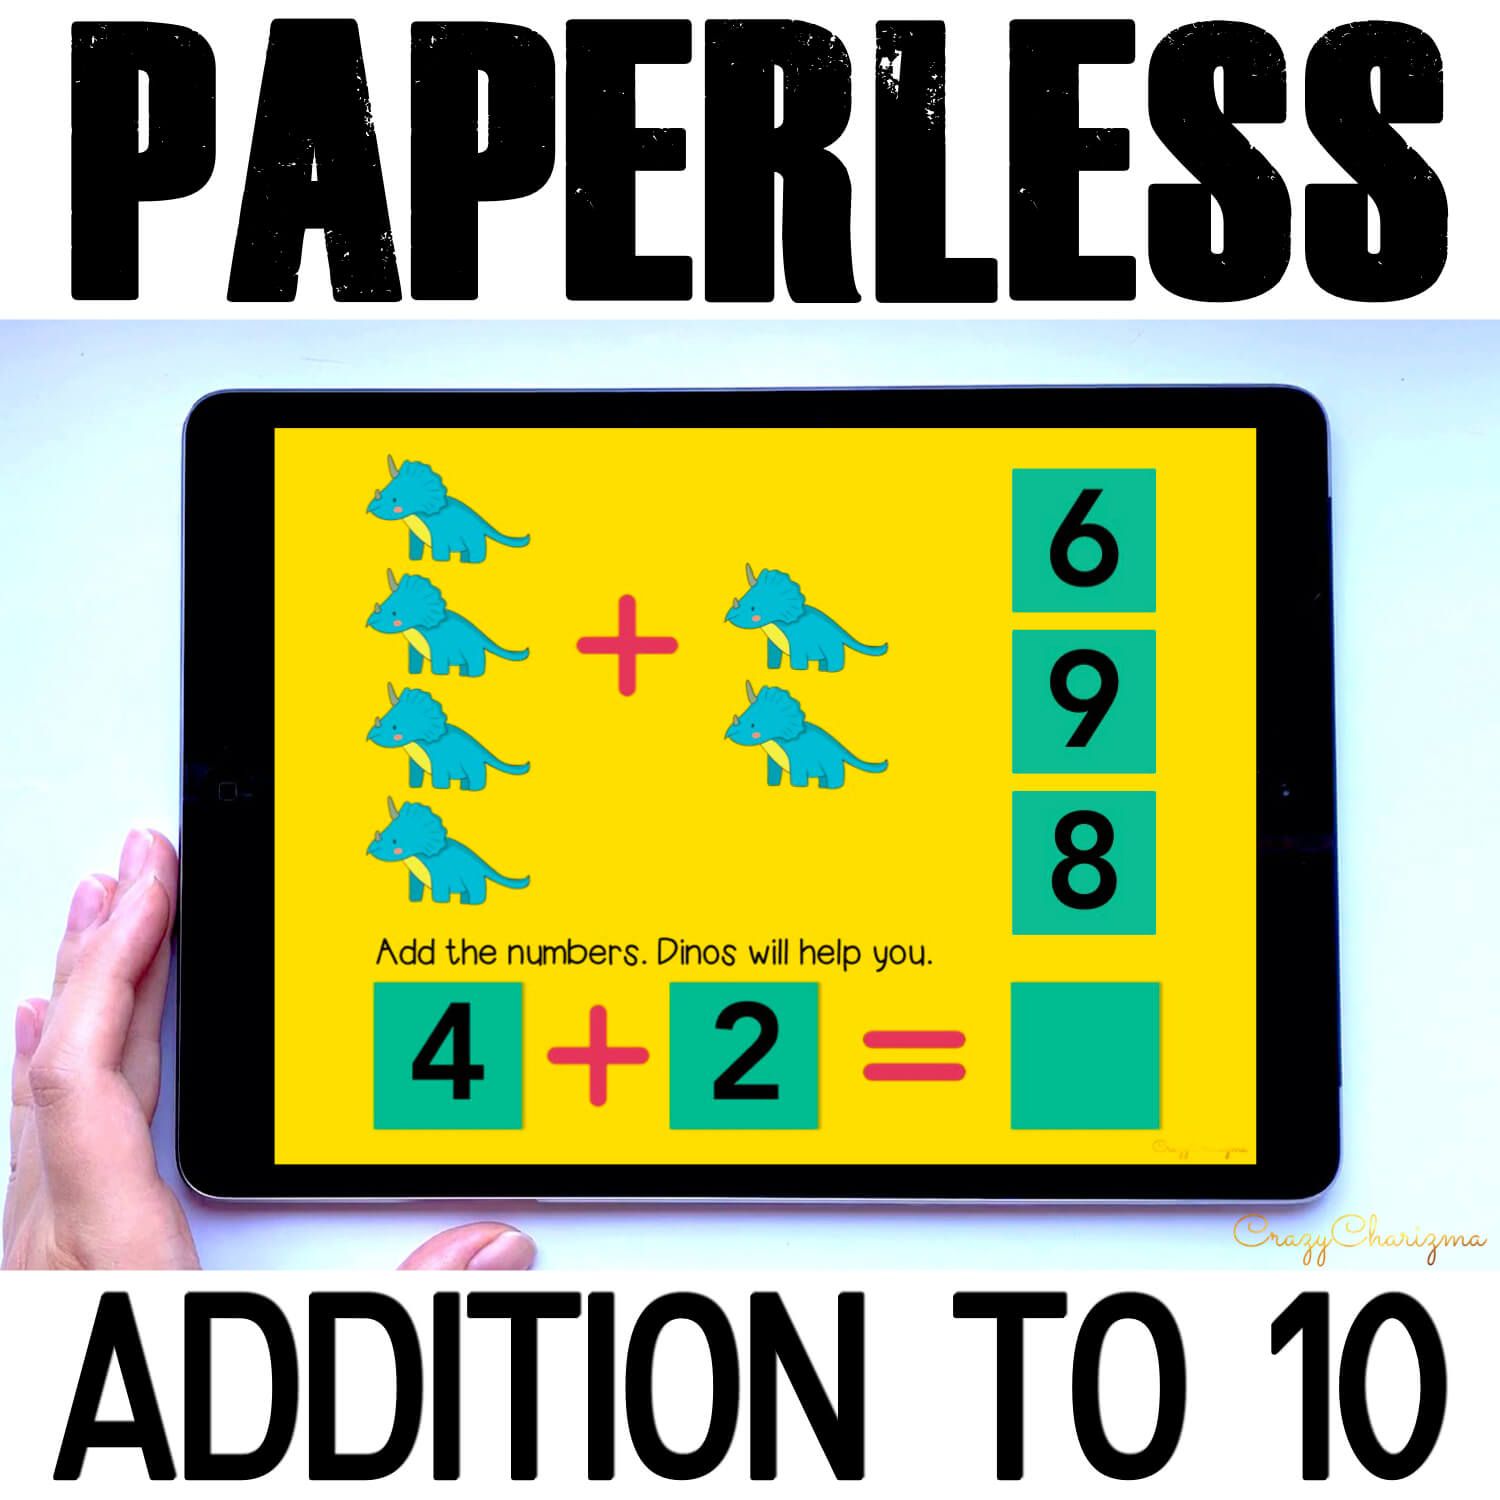 Need engaging Addition to 10 activities for distance learning? Have fun with this math center. Kids will add numbers and drag moveable pieces with the correct answer. Pictures of dinos will help! This paperless set is perfect for Google Classroom and Google Slides.